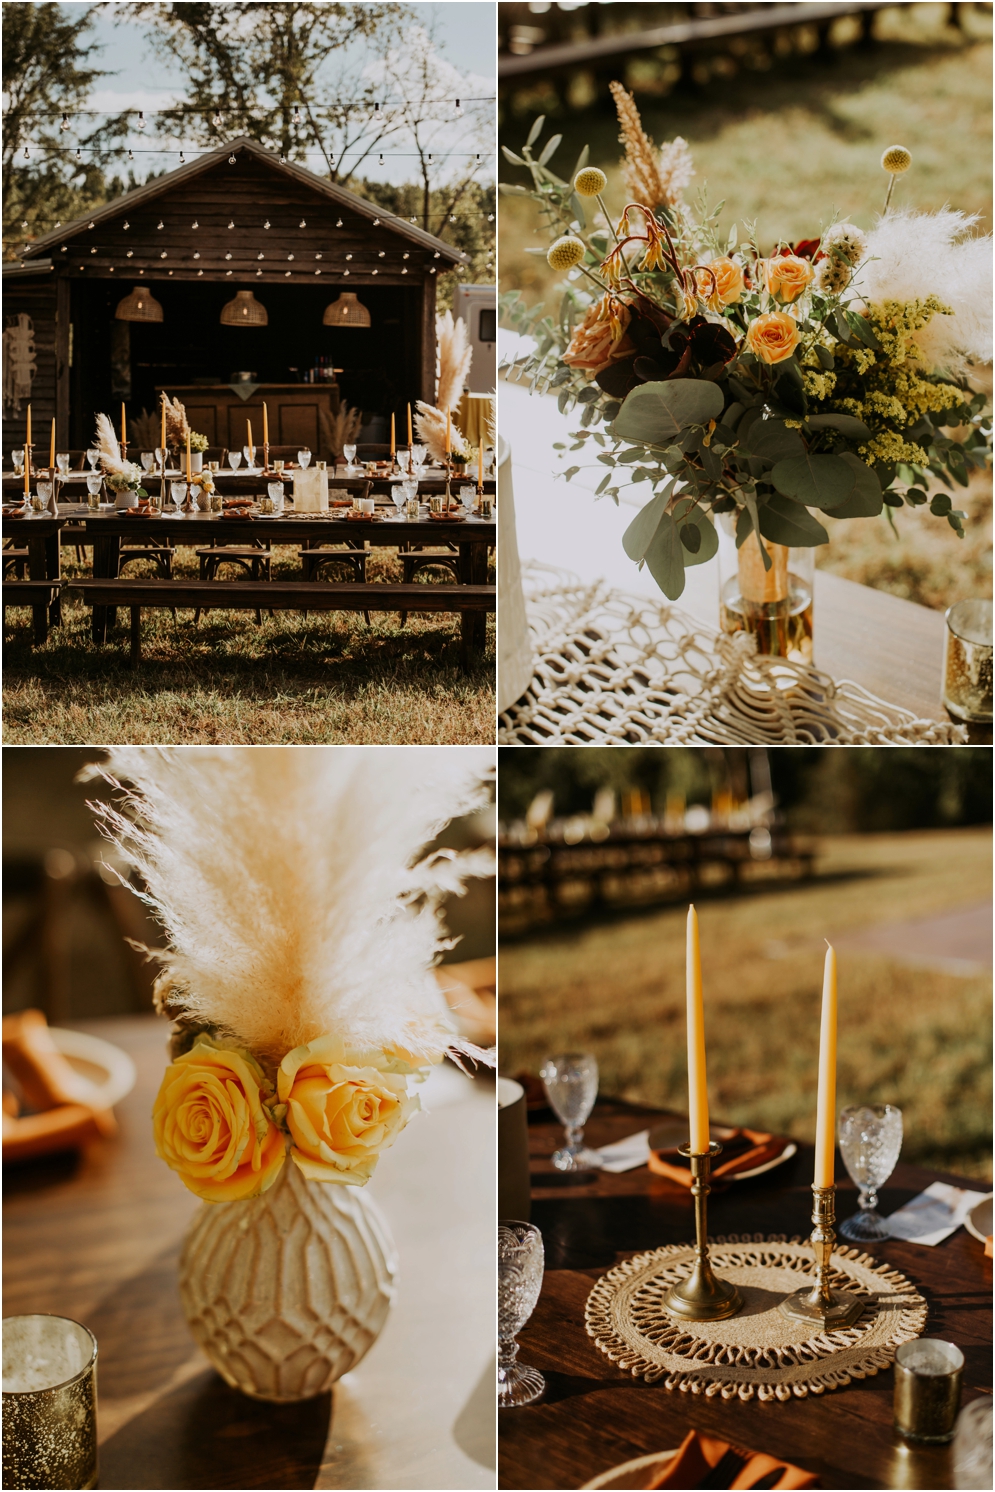 Boho Reception, Erin Padgett Events, Candace Erin Padgett Events, Weddings with Barbara, Outdoor Reception, Bohemian Reception Decor, Fall Wedding, Macrame, Center Pieces, Florals, Boho Florals, Boho Centerpieces,